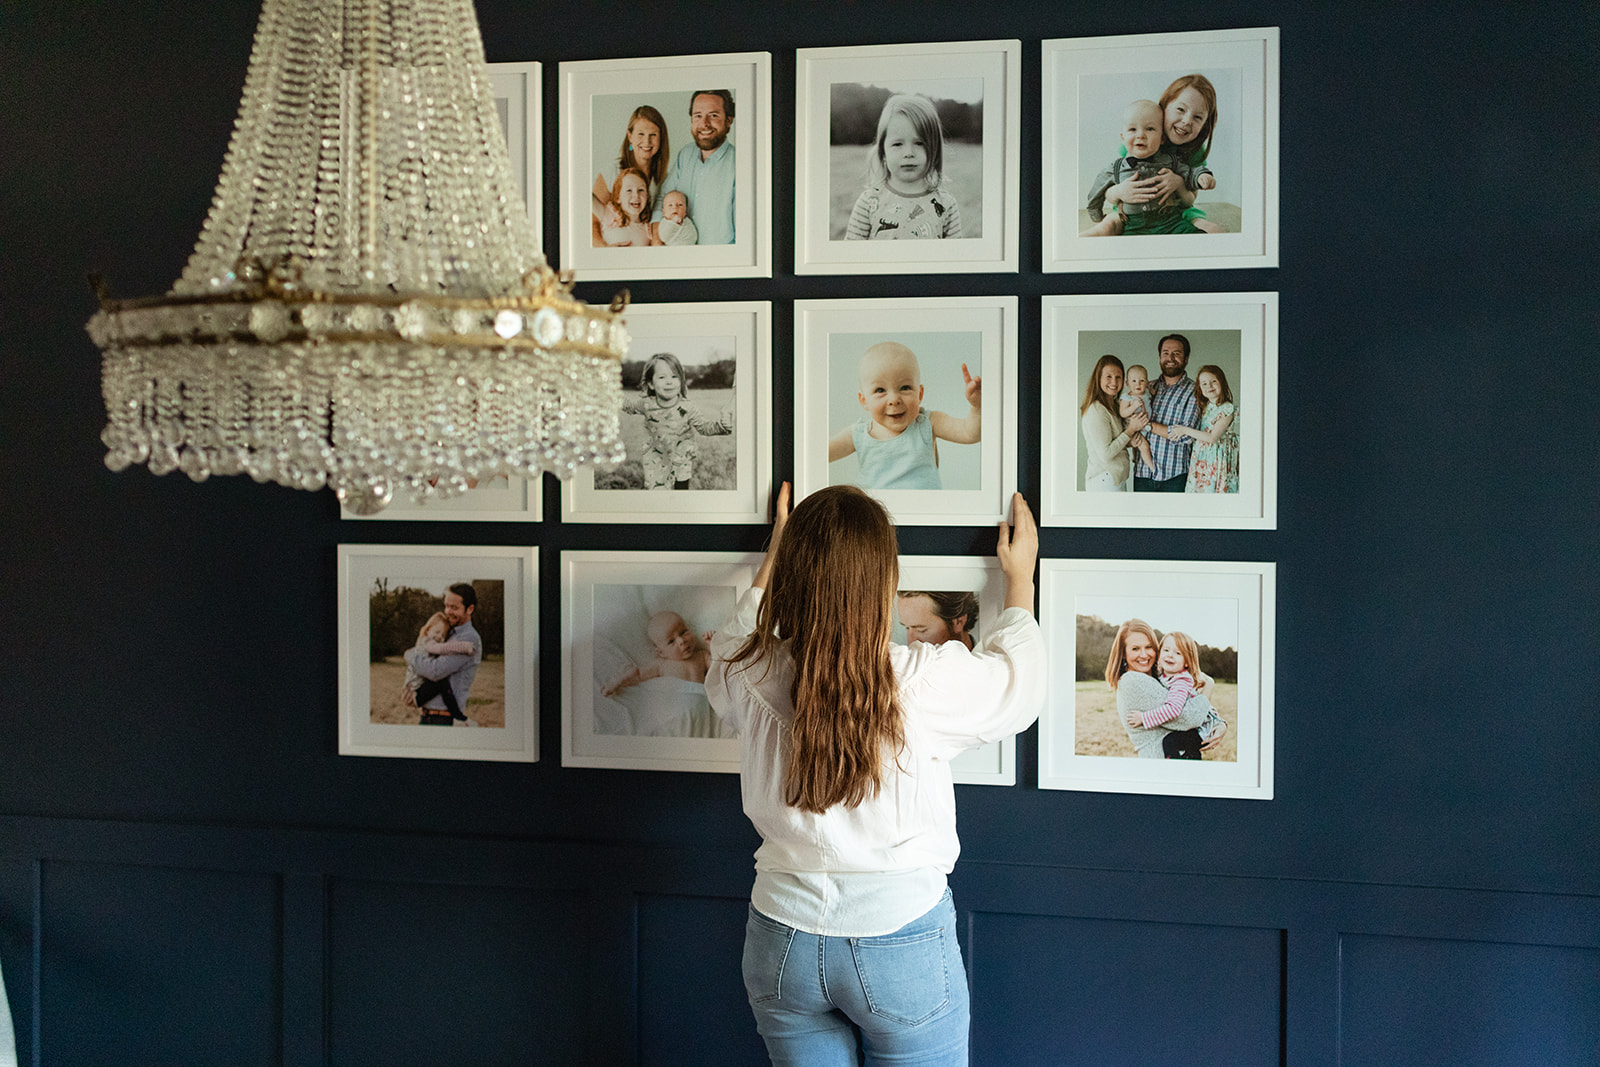 sarah sidwell, nashville family photographer hanging up framed photos (gallery wall)